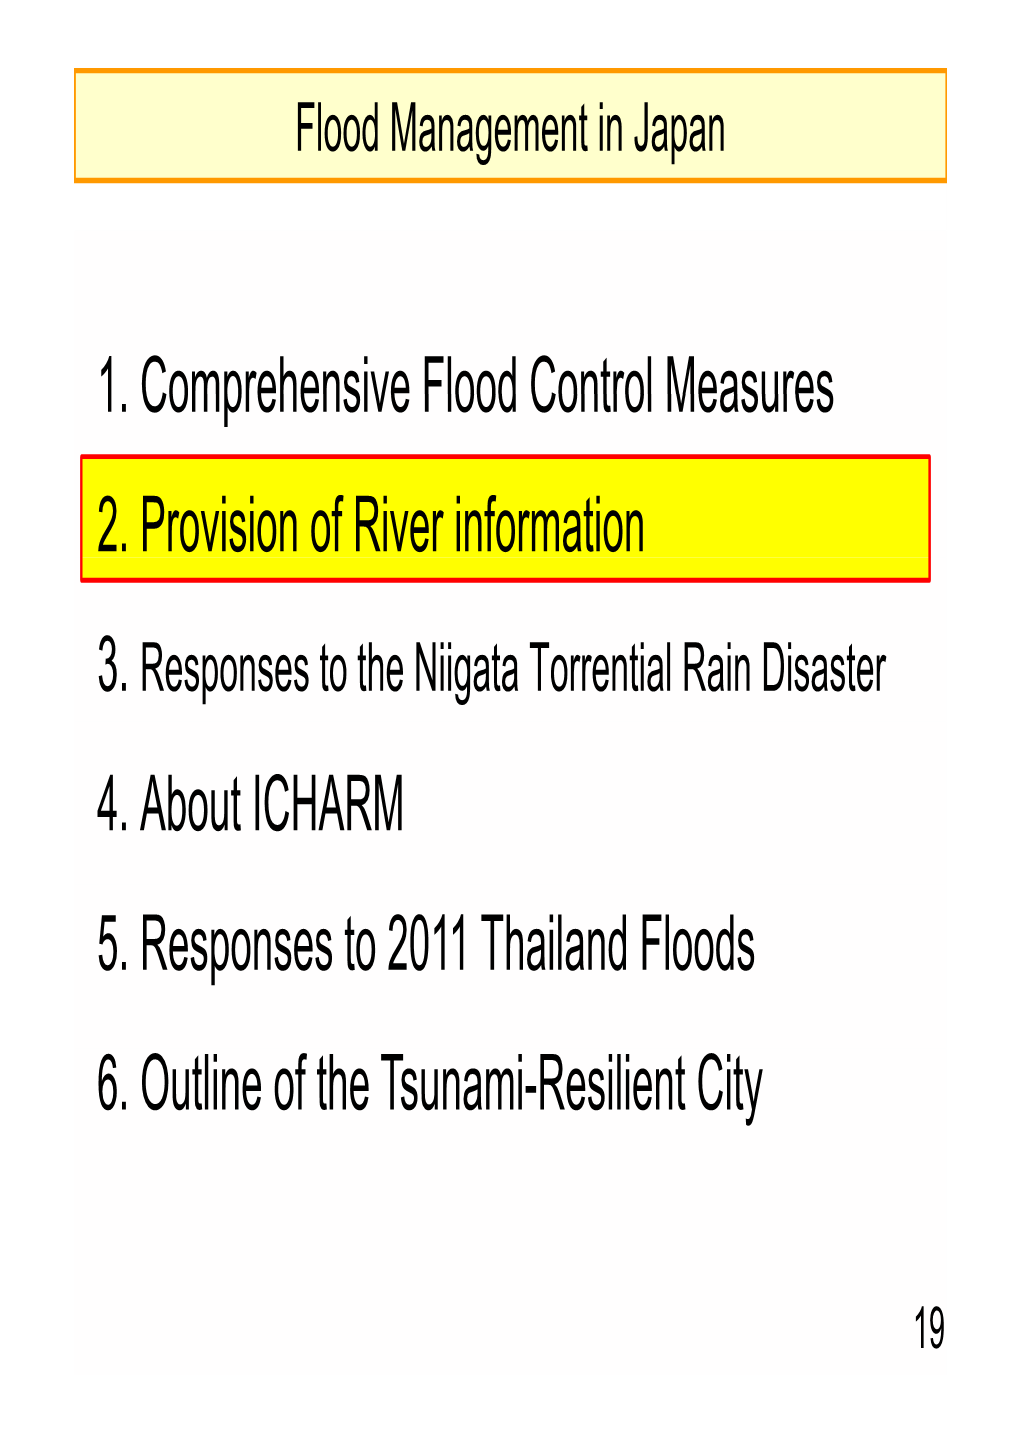 2, Provision of River Information